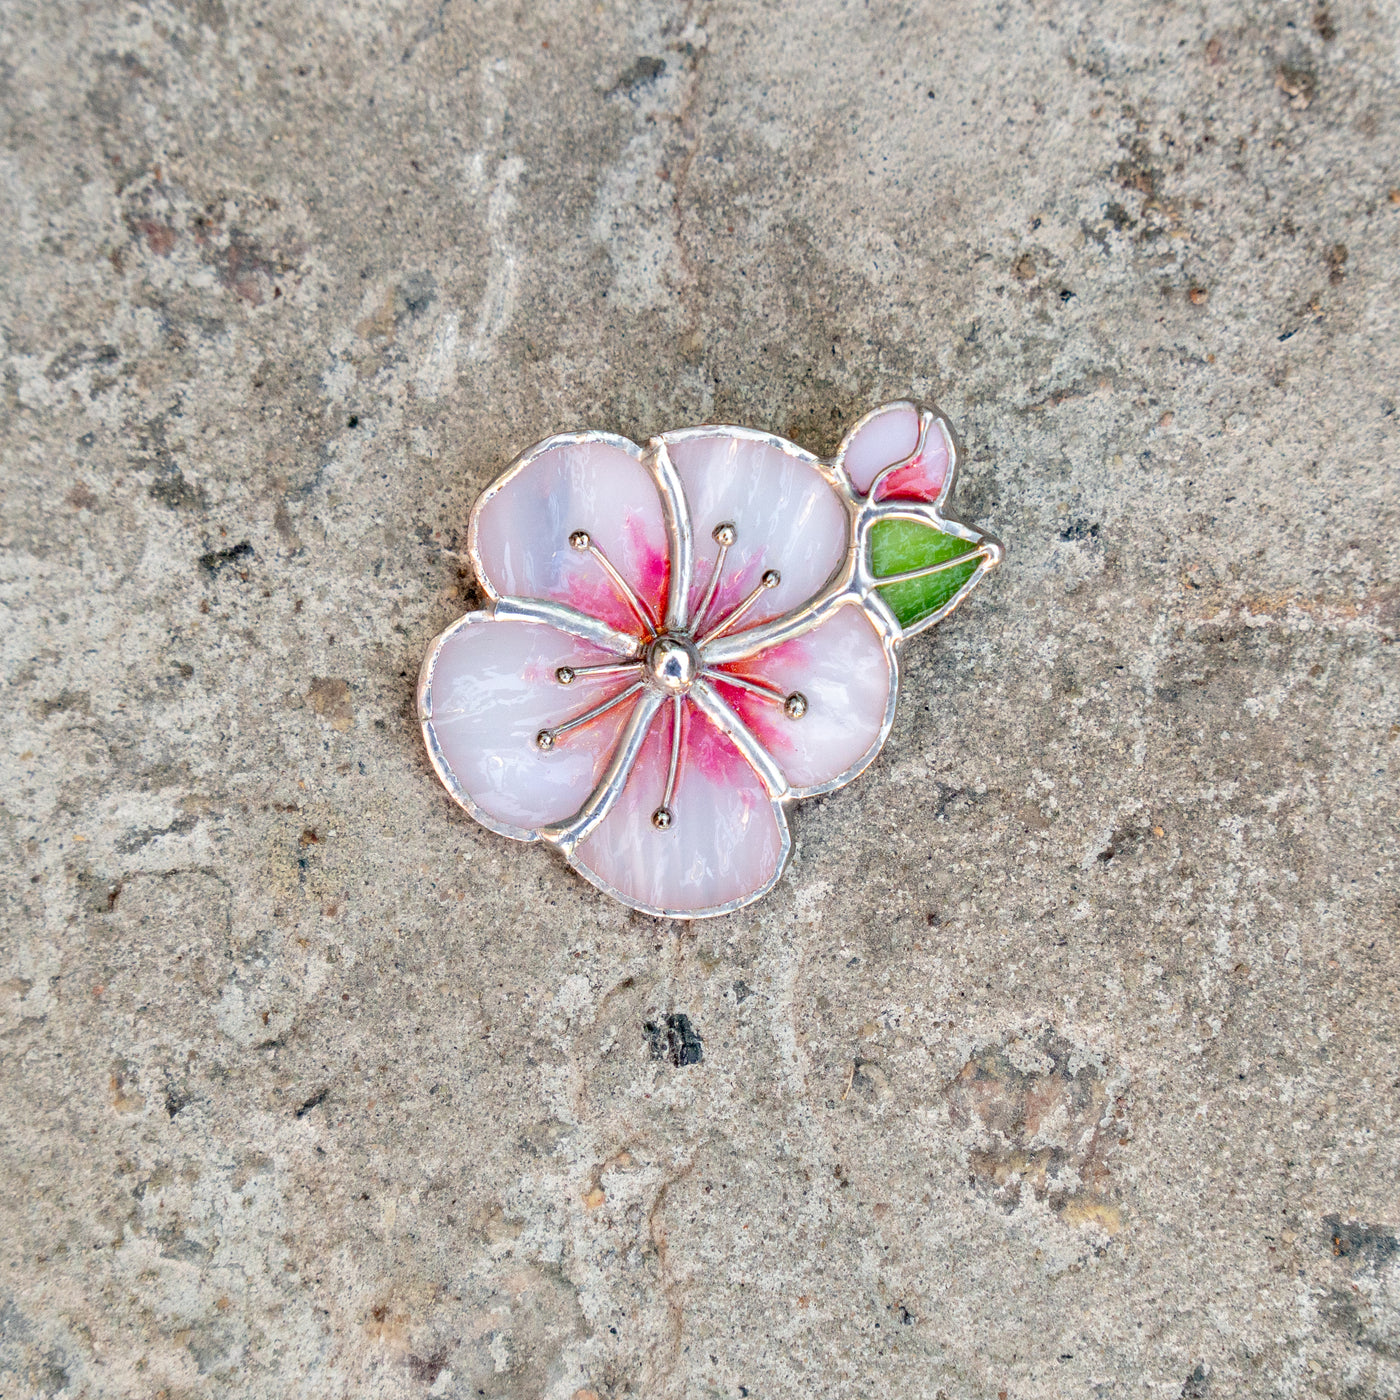 Sakura blossom flower with a green leaf brooch of stained glass